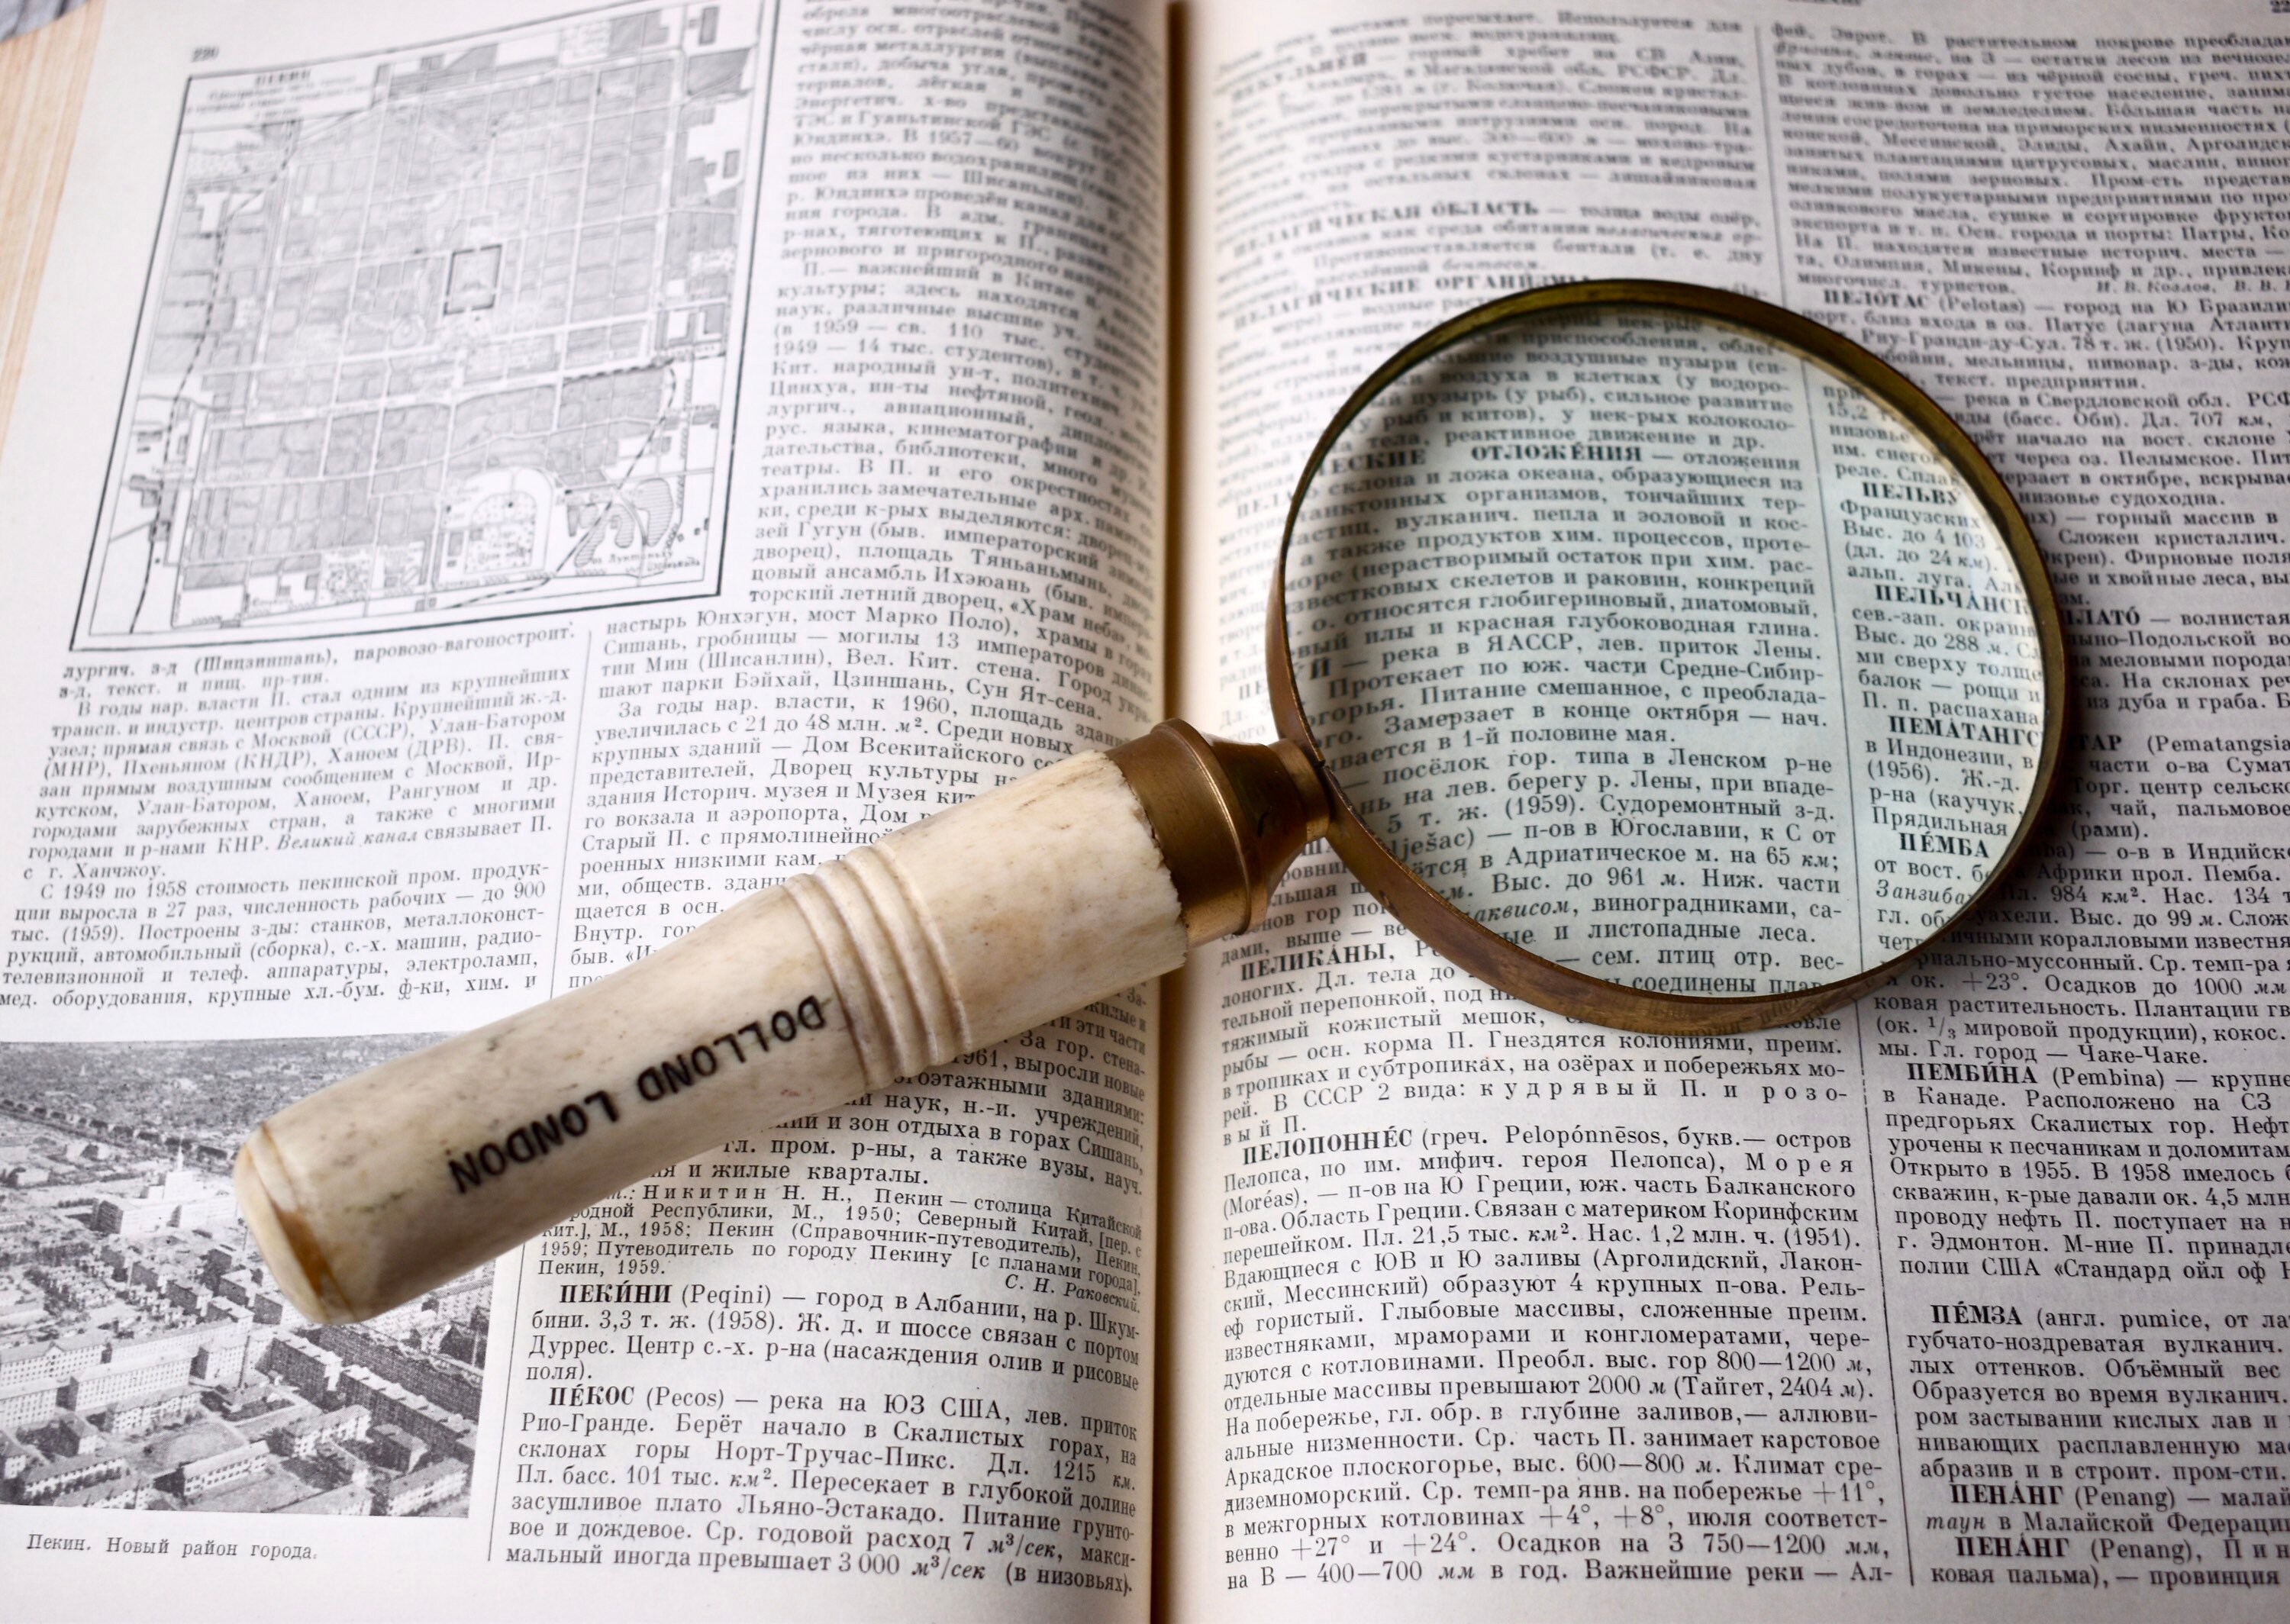 A wooden board and steel made vintage style magnifying glass, complete  handmade, made by artisians High